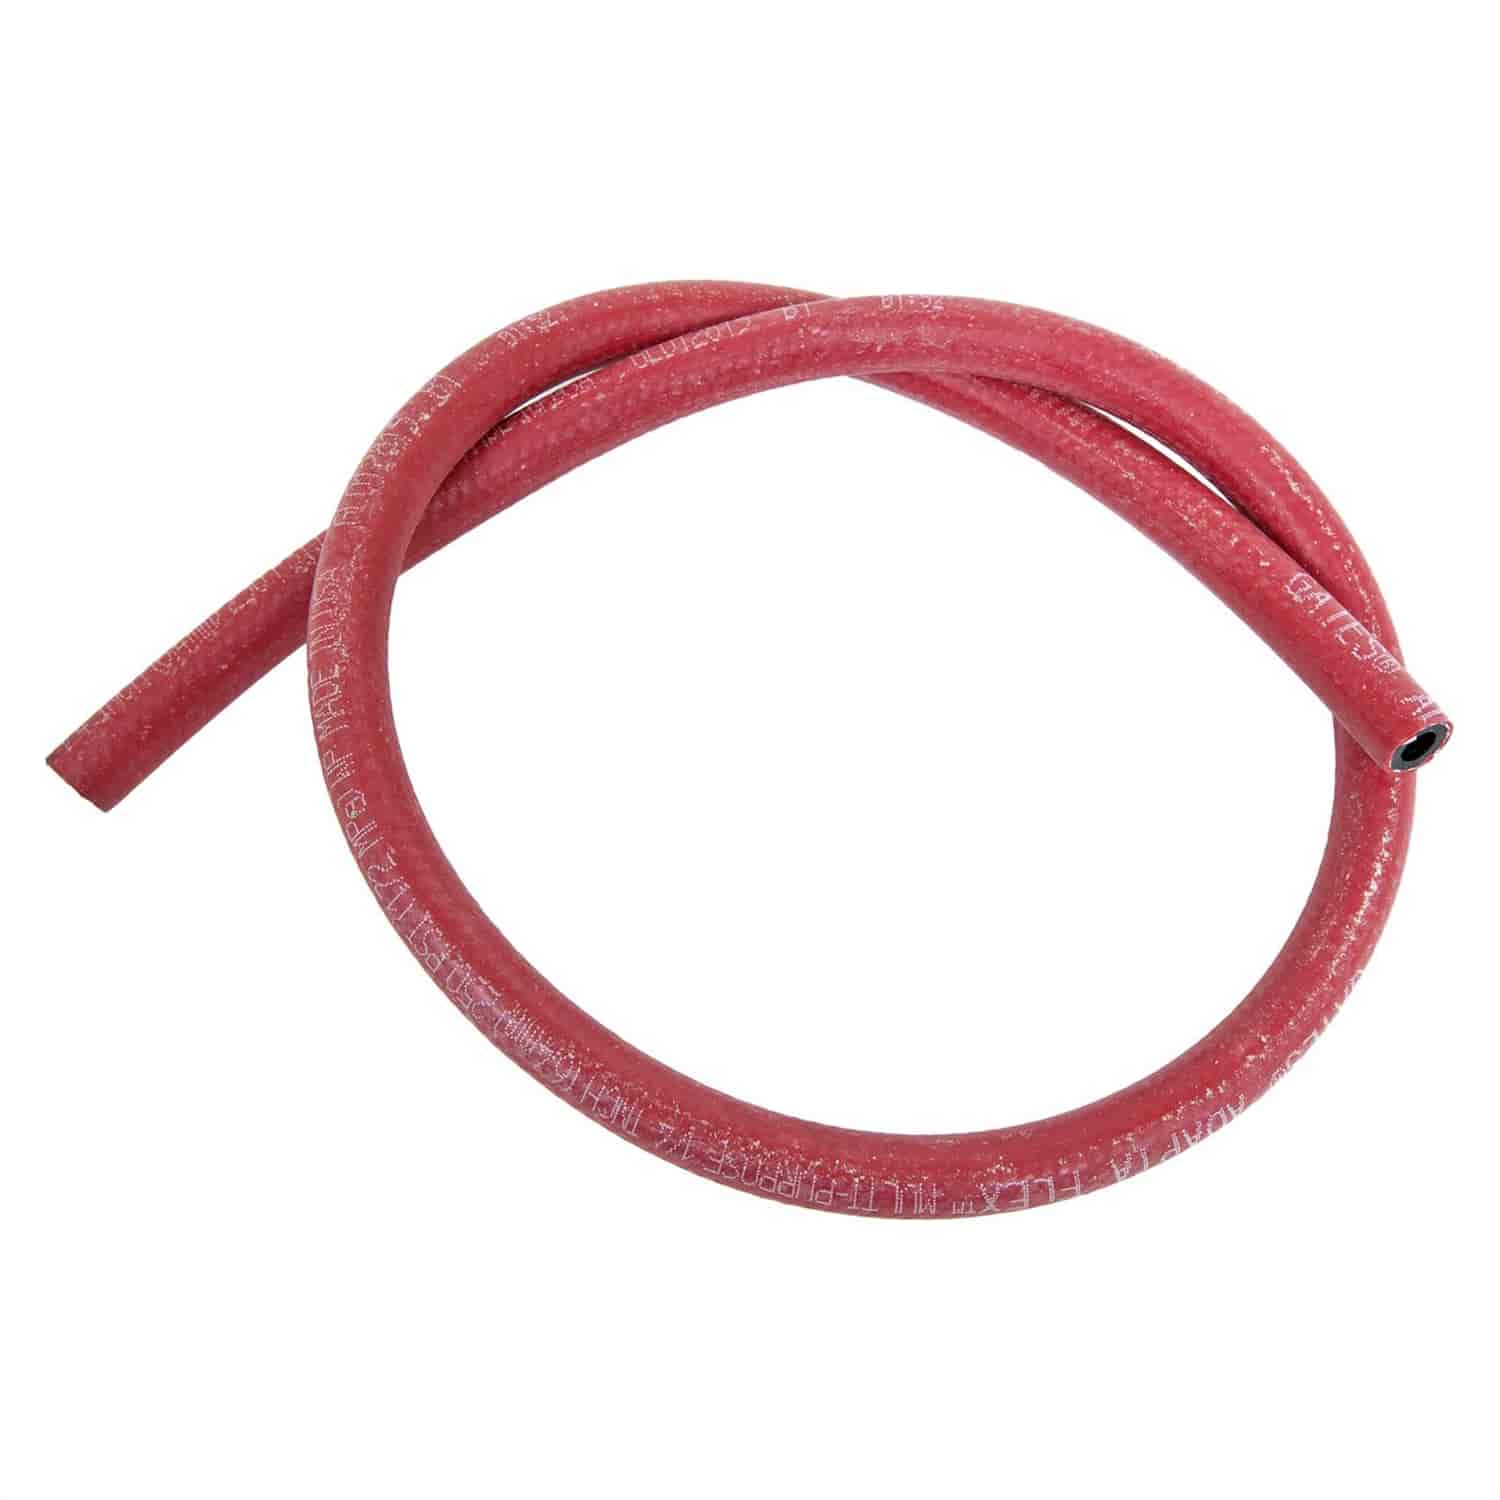 REMOTE MASTER CYLINDER HOSE 1/4 ID BULK BY THE INCH